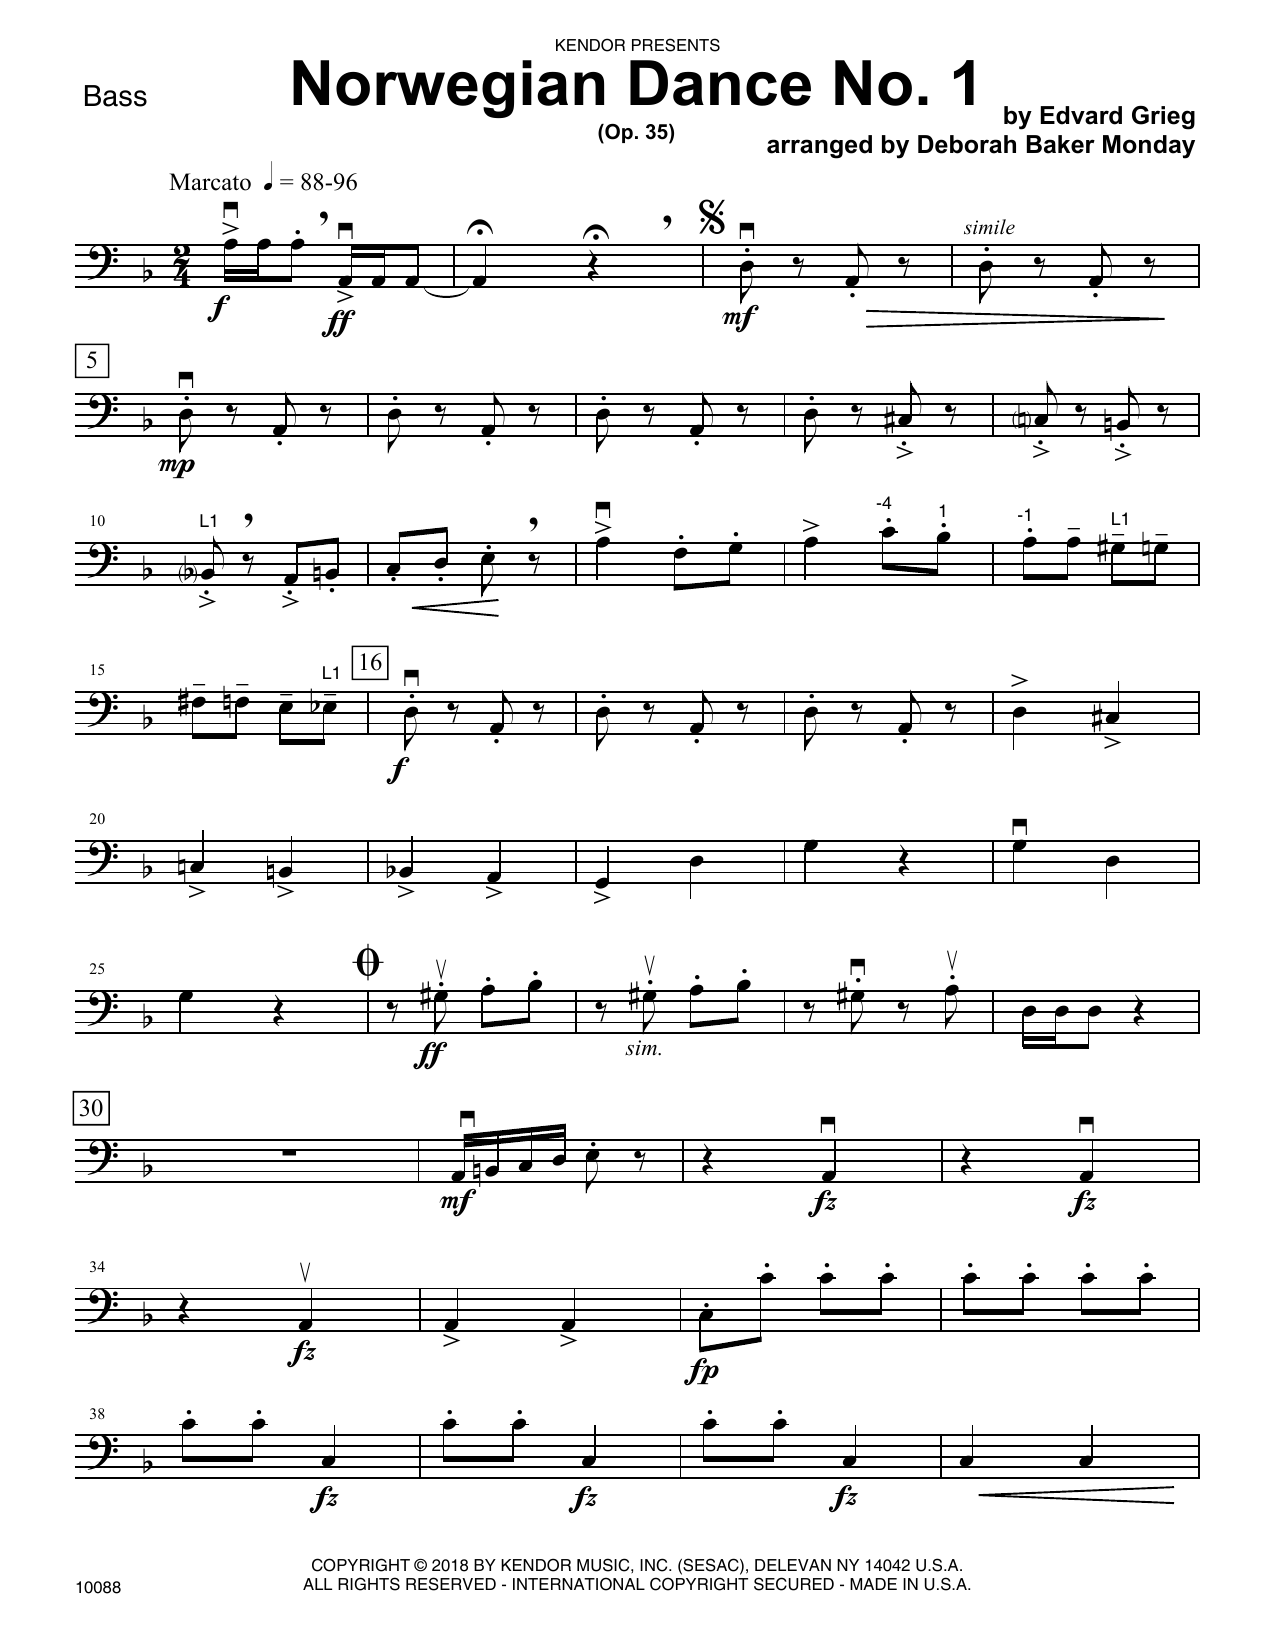 Deborah Baker Monday Norwegian Dance No. 1 (Op. 35) - Bass sheet music preview music notes and score for Orchestra including 3 page(s)